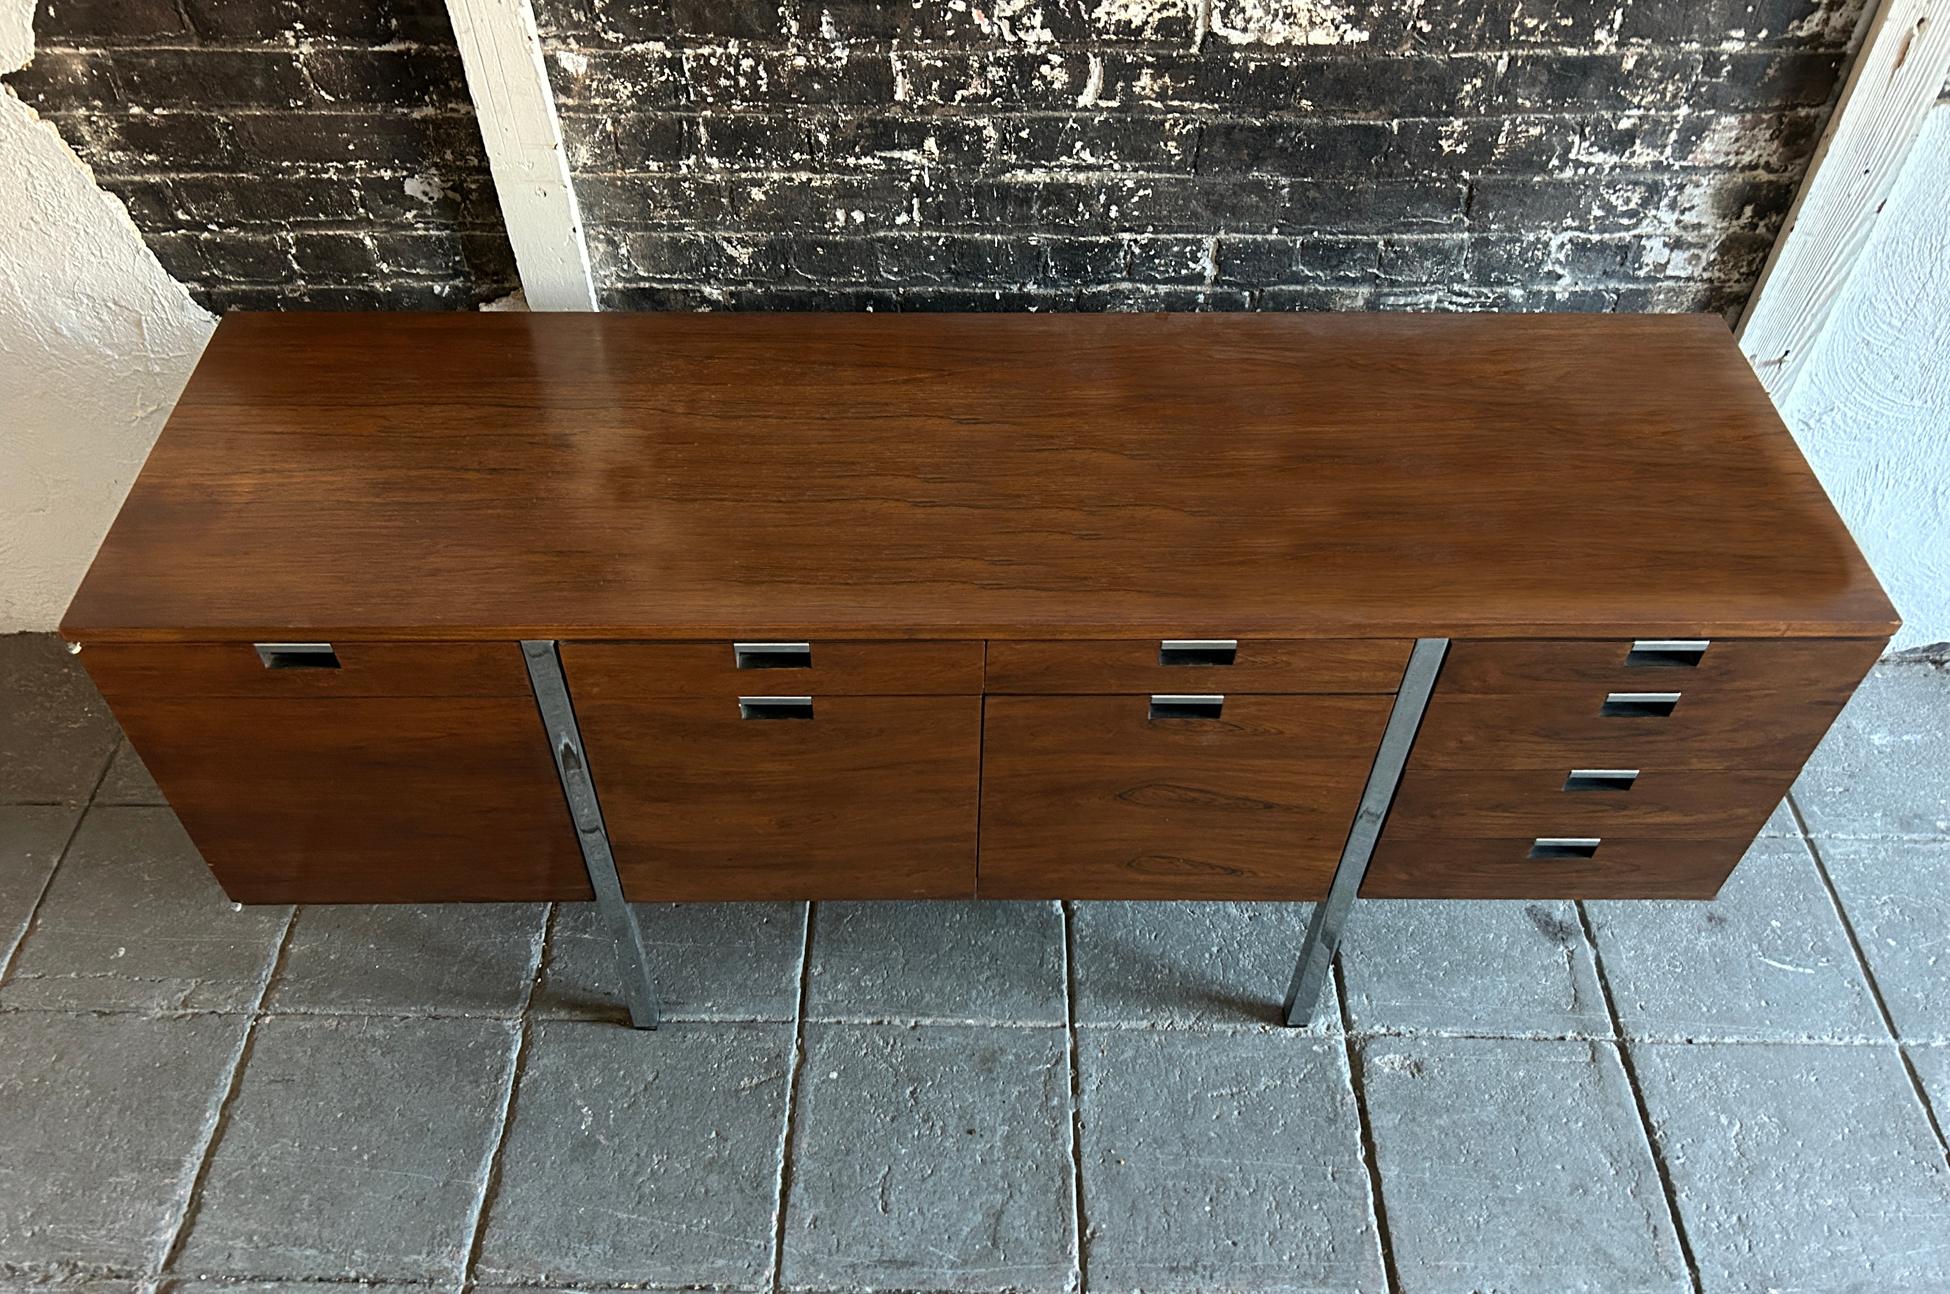 Handsome Mid Century credenza designed in the 1970s by Roger Sprunger for Dunbar #1060. Composed of exquisite rosewood veneer and chrome inset pulls and square tube legs. Plenty of storage in a variety of configurations. The far right side features